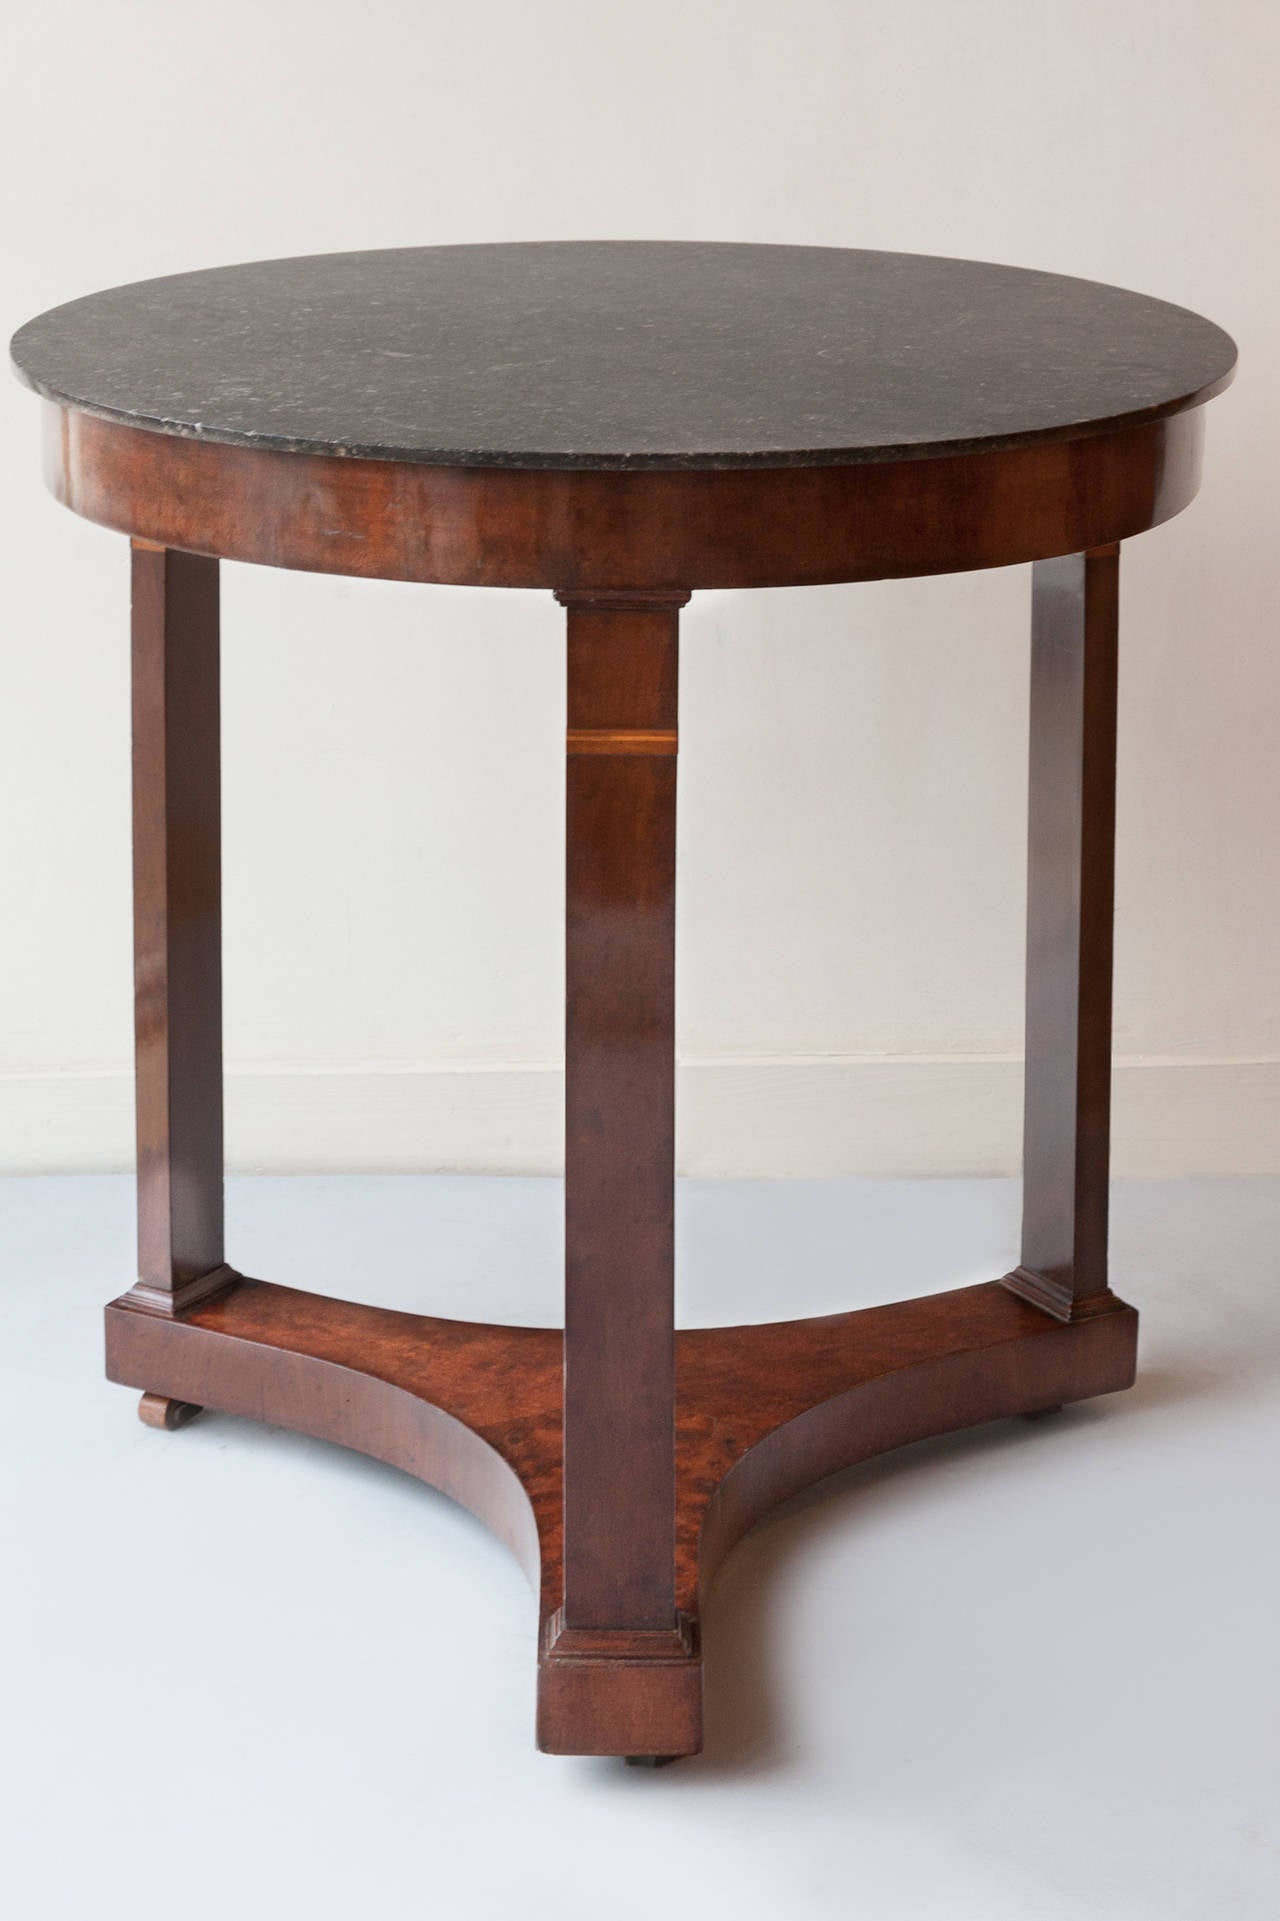 Plumb pudding mahovany with black marble top. Small inlaid bands of boxwood on the flat rectangular legs. 
The marble has had a small repair to the side.